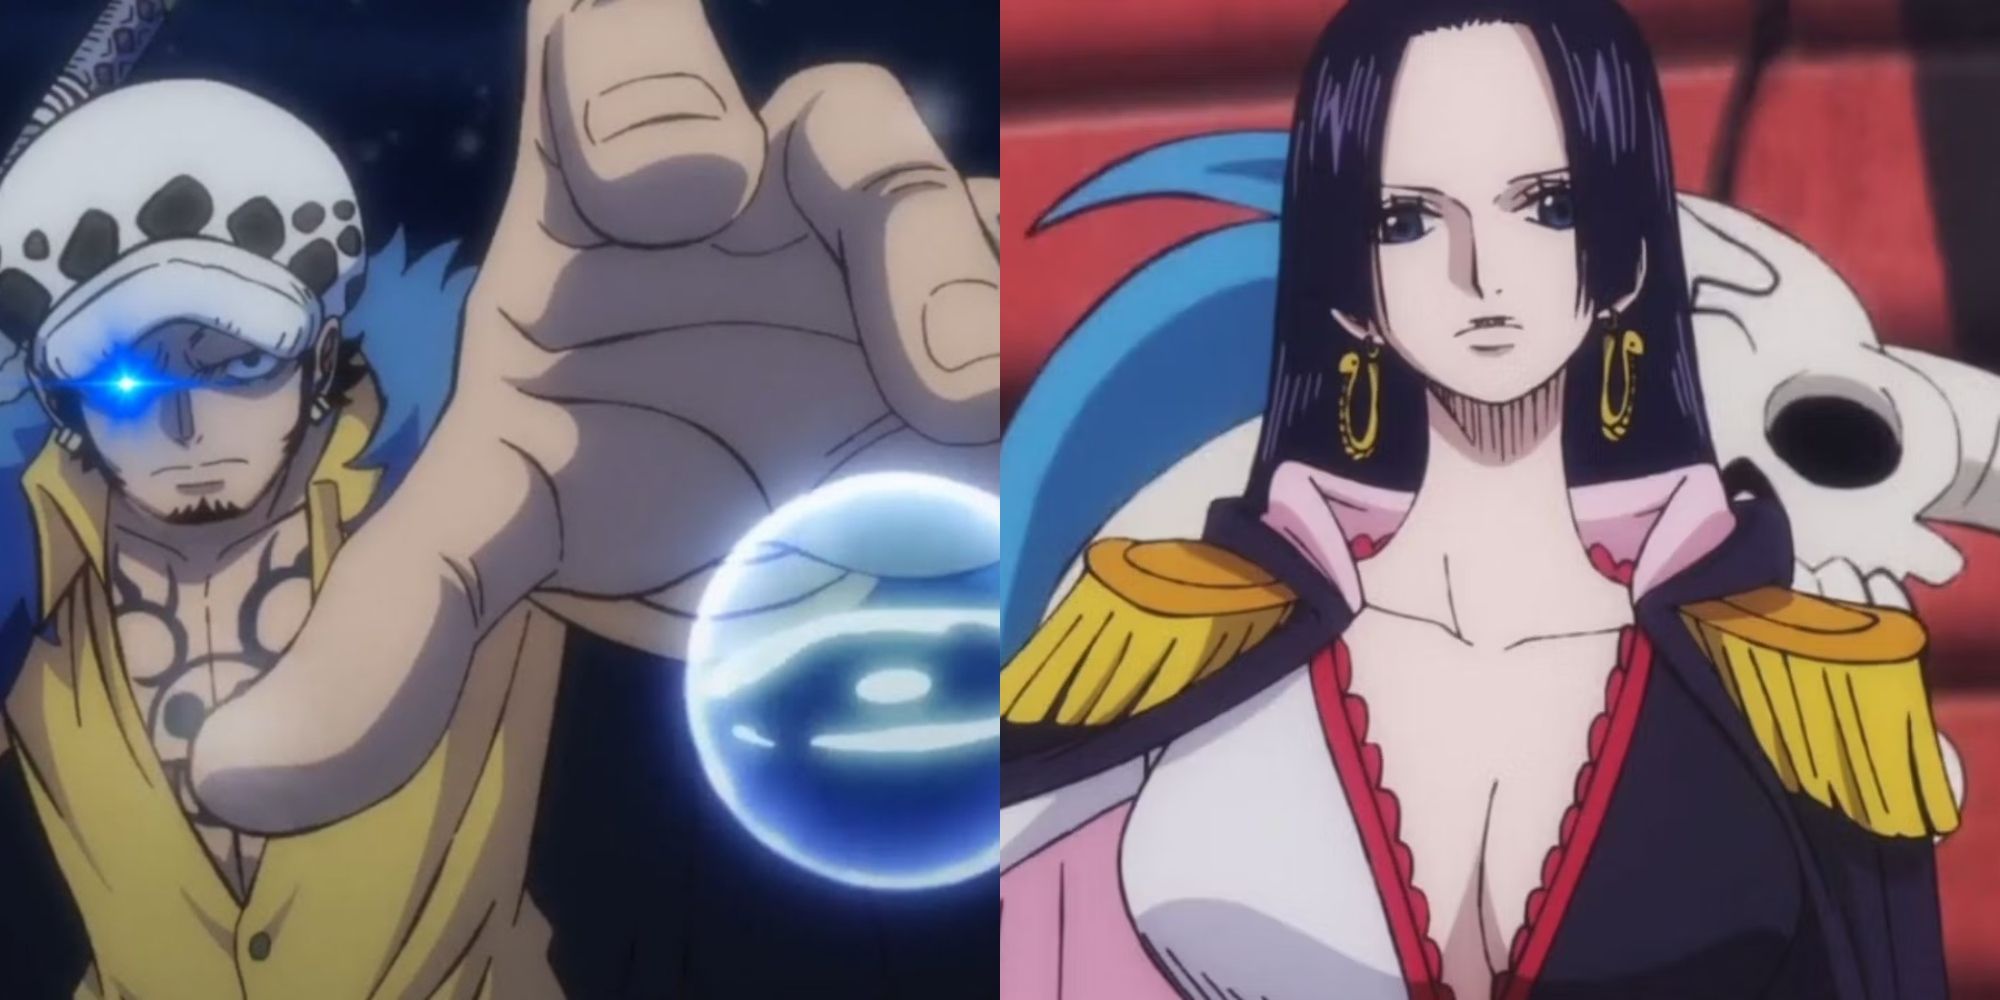 Two side by side images from One Piece.